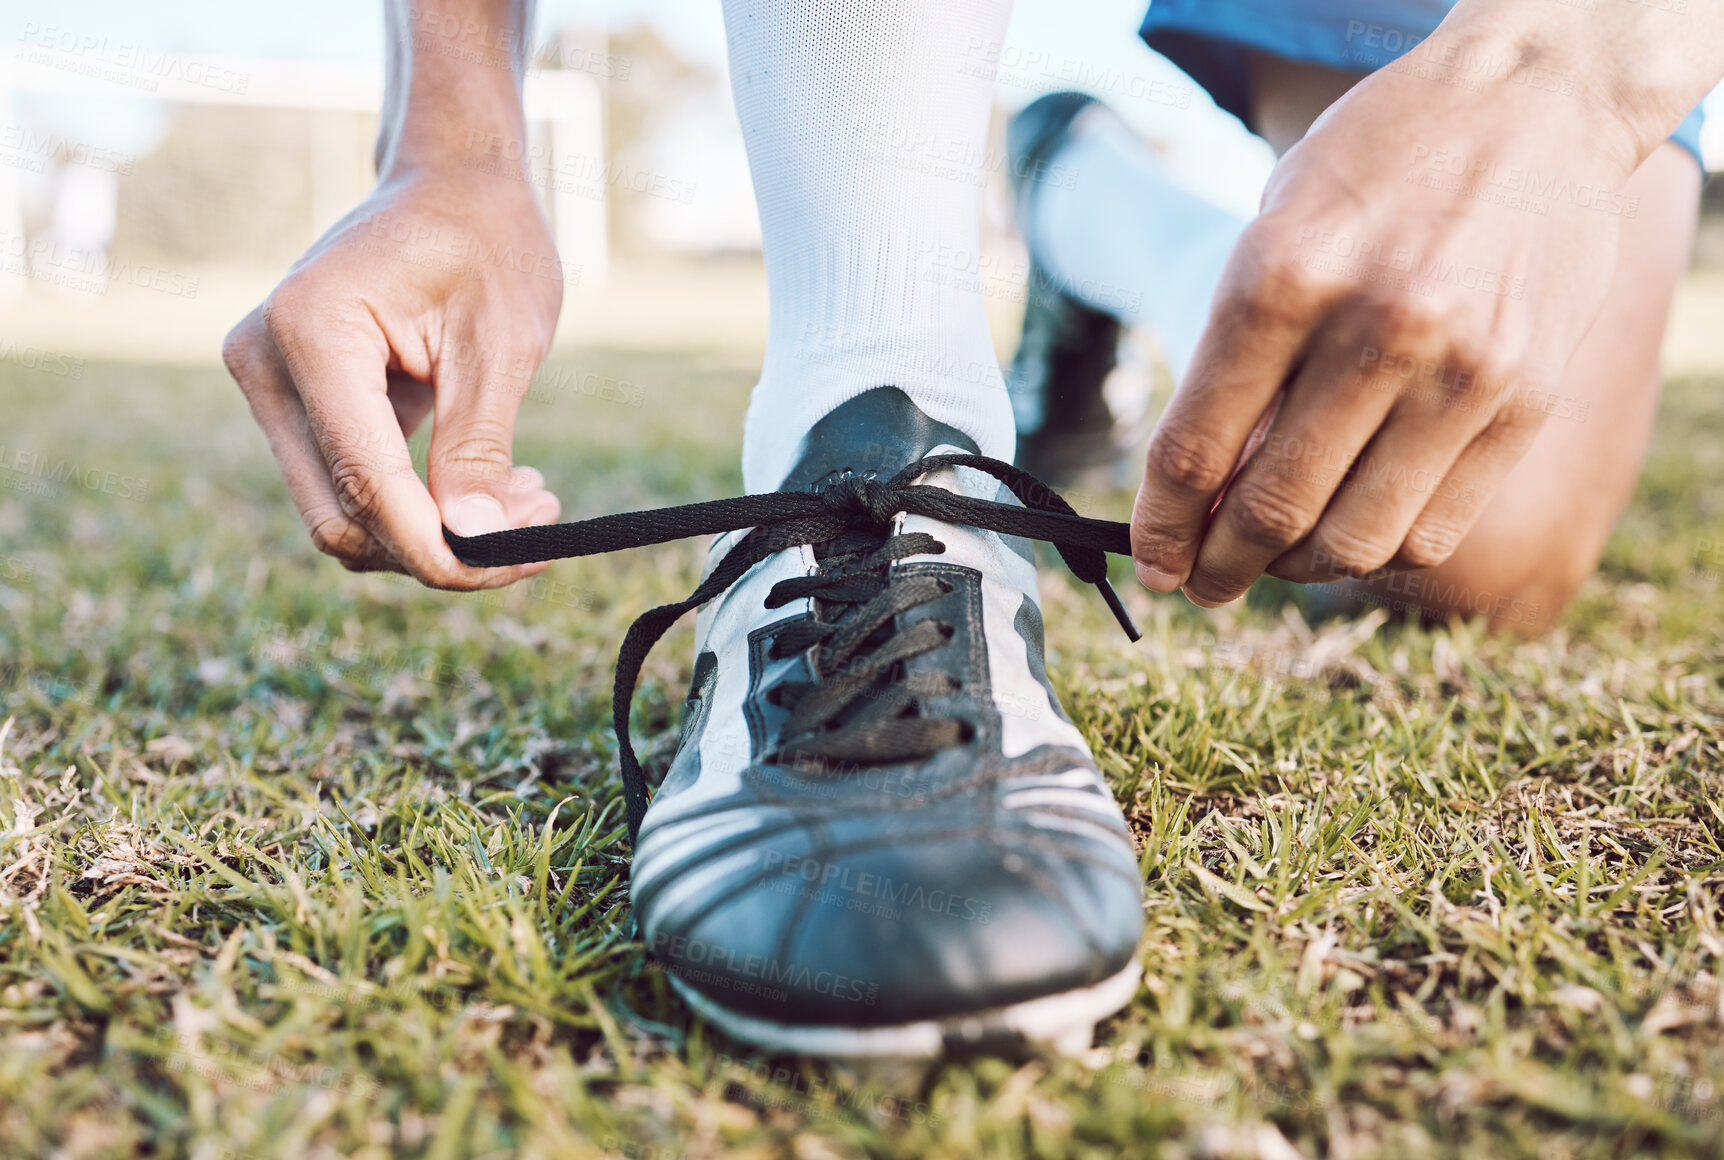 Buy stock photo Sports, soccer field and man tie shoes for game, ready for training, workout and fitness outdoor. Male, guy or athlete tying shoe lace, before practice or exercise for wellness, cardio or competition